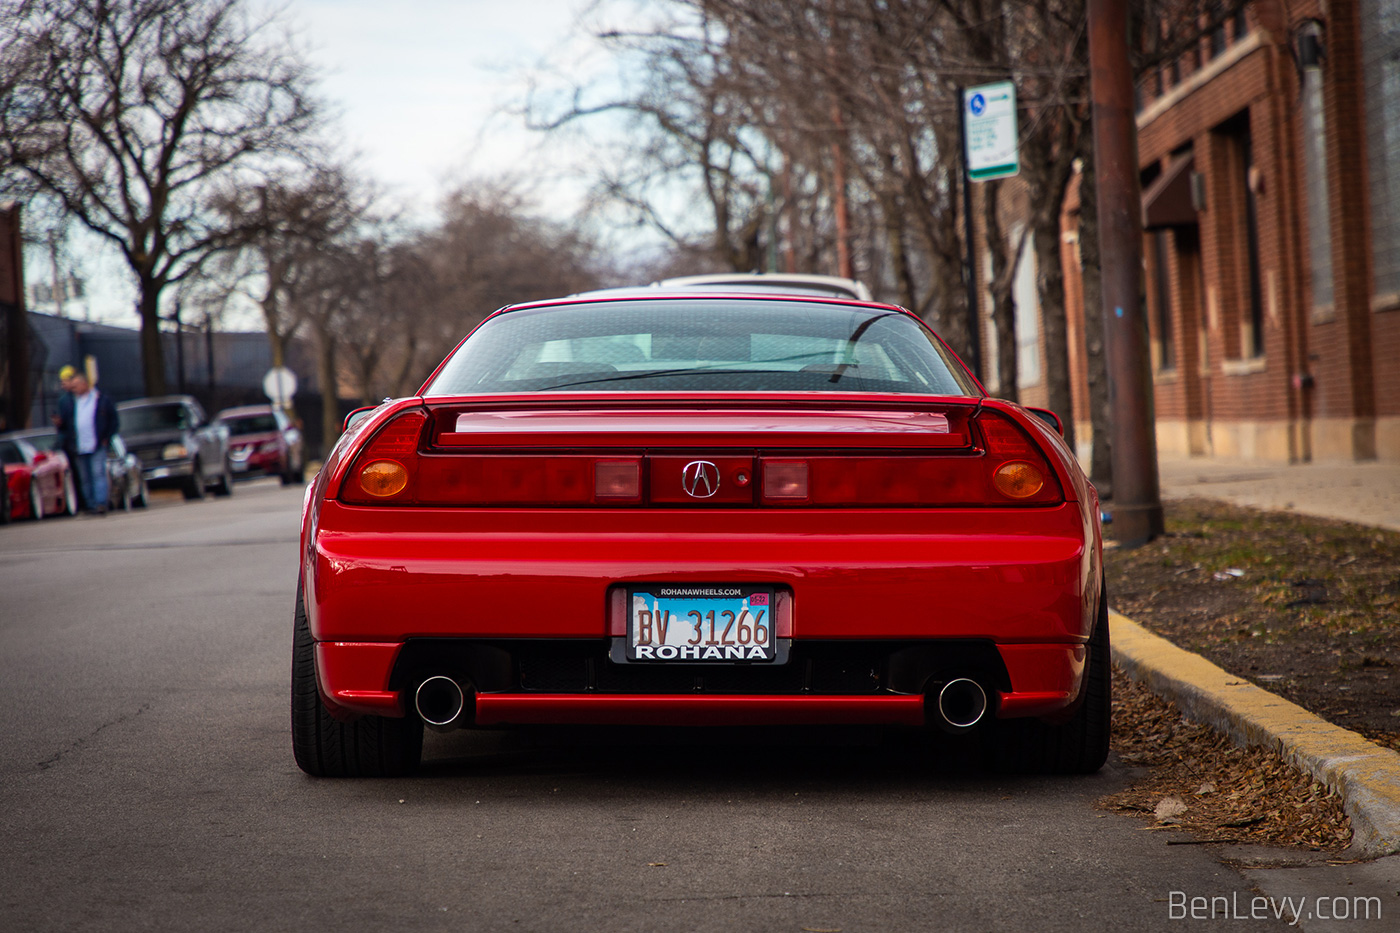 Tail Lights of Red Acura NSX